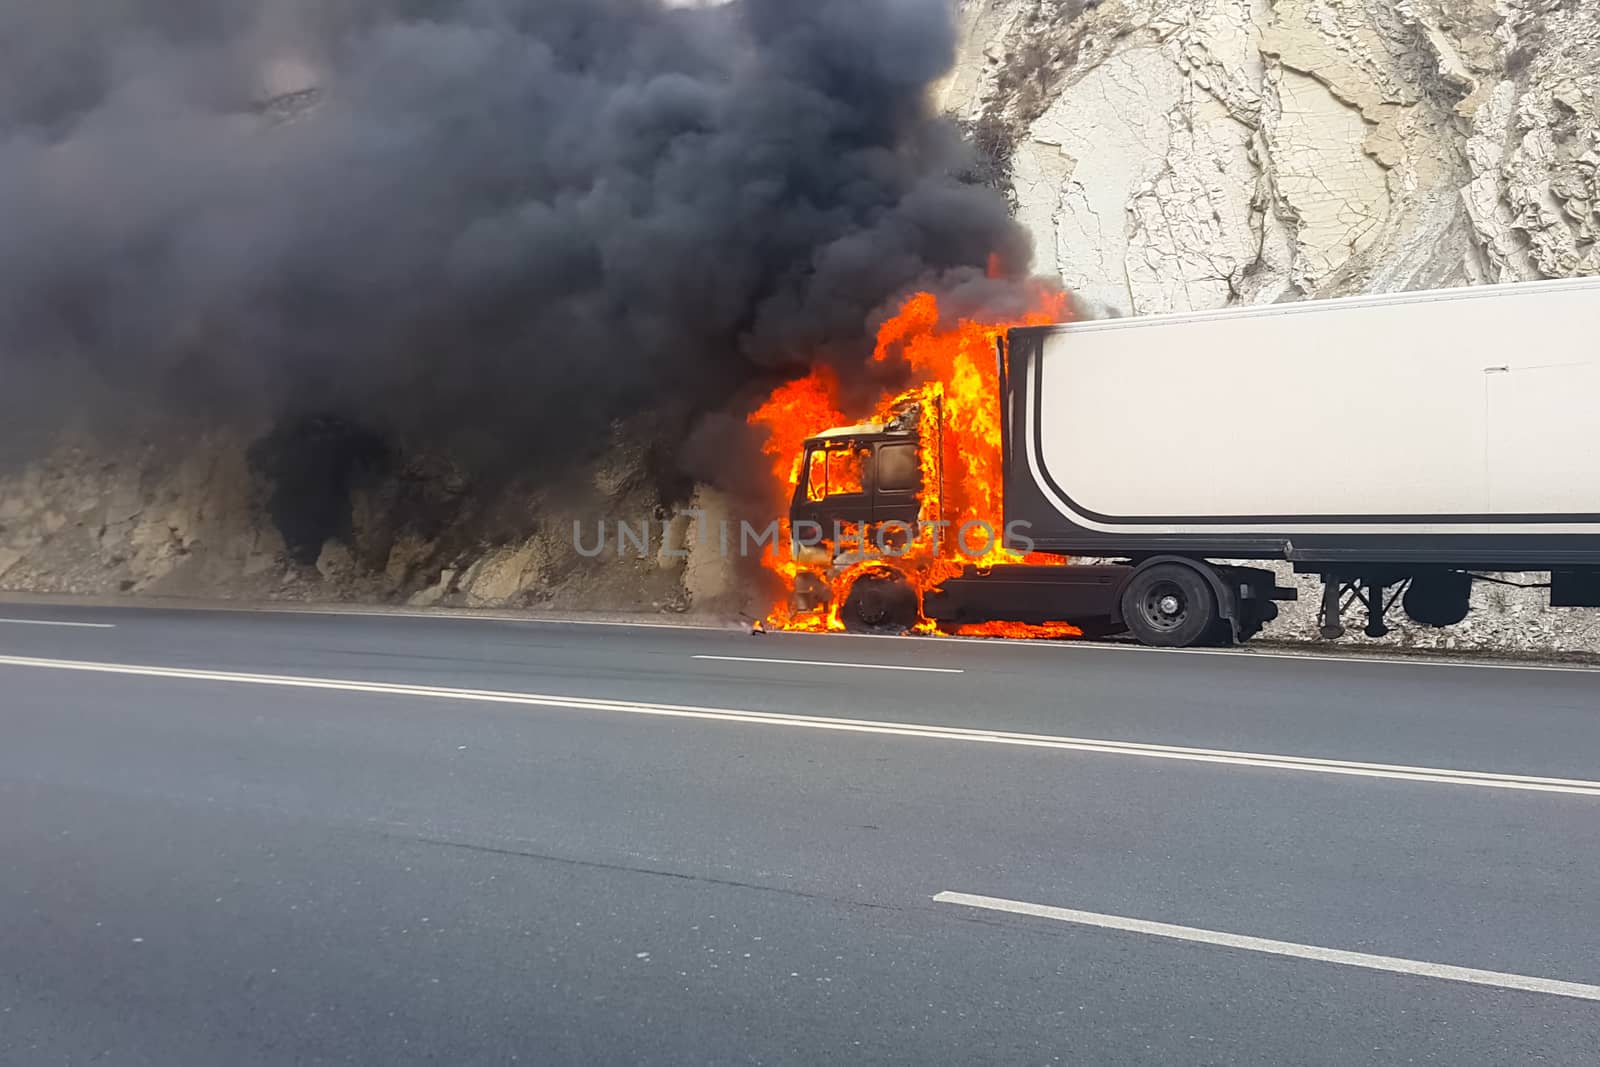 Burning truck on the road. cab of the truck is on fire. by DePo